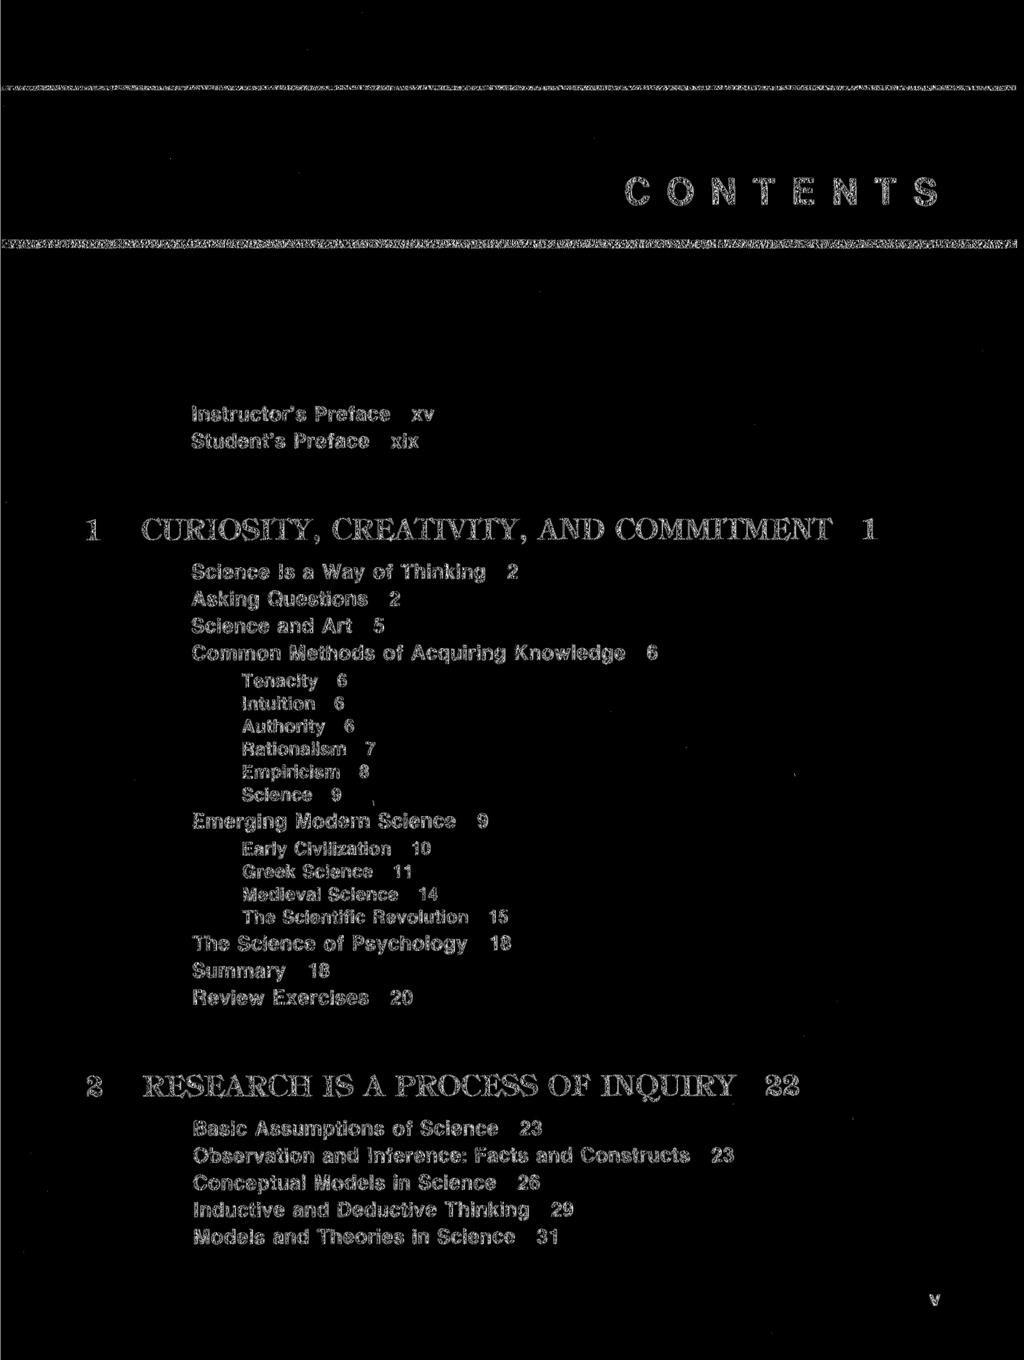 CONTENTS Instructor's Preface xv Student's Preface xix 1 CURIOSITY, CREATIVITY, AJVD COMMITMENT 1 Science Is a Way of Thinking 2 Asking Questions 2 Science and Art 5 Common Methods of Acquiring